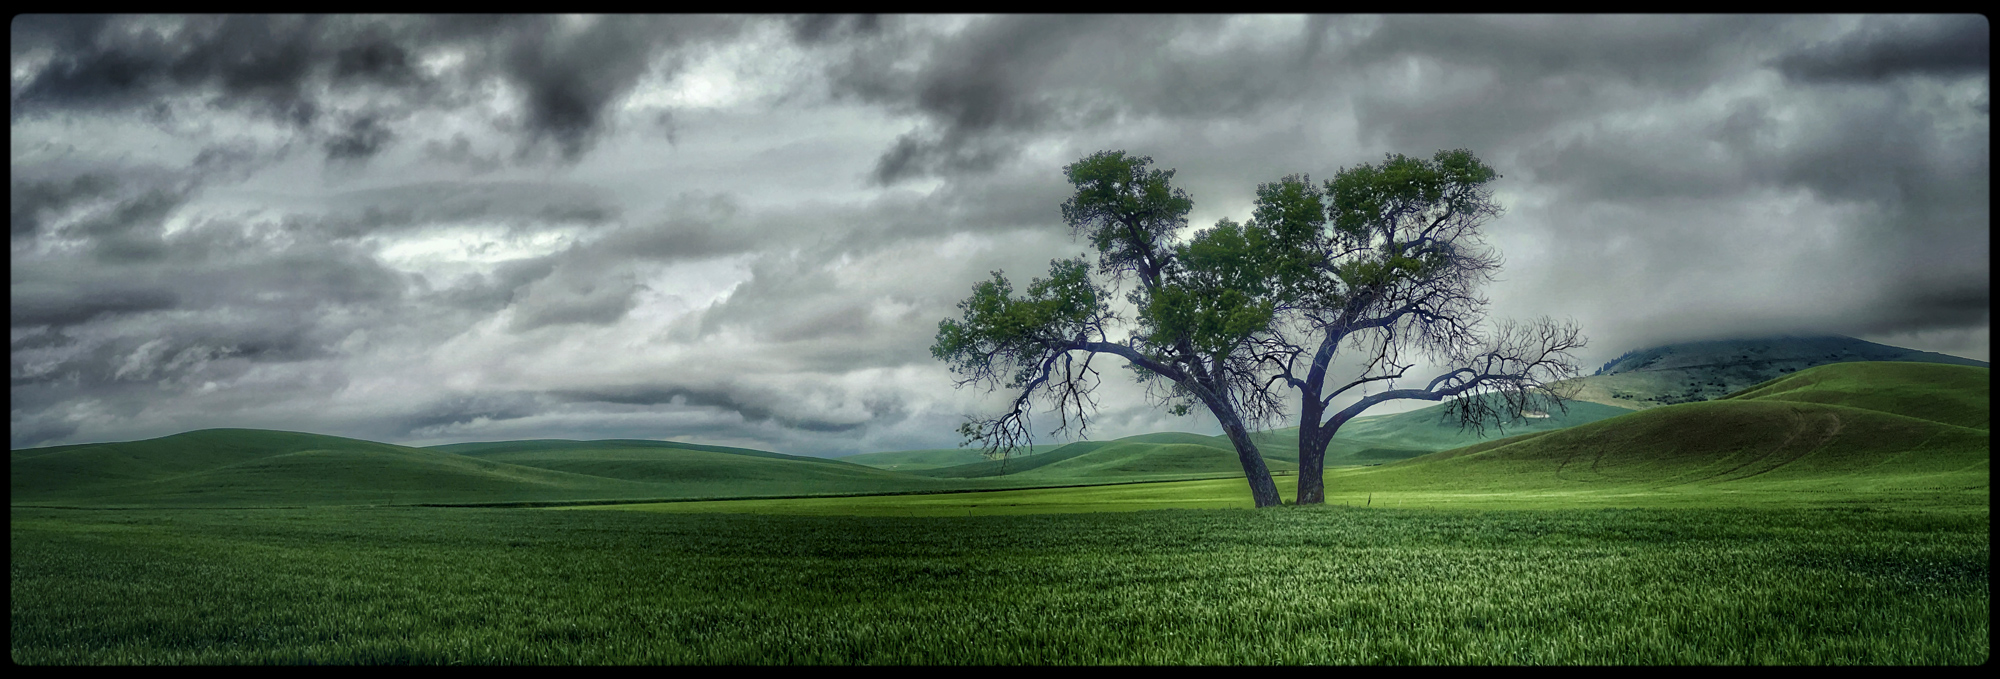 The Lonely Tree, an iconic symbol of the Palouse